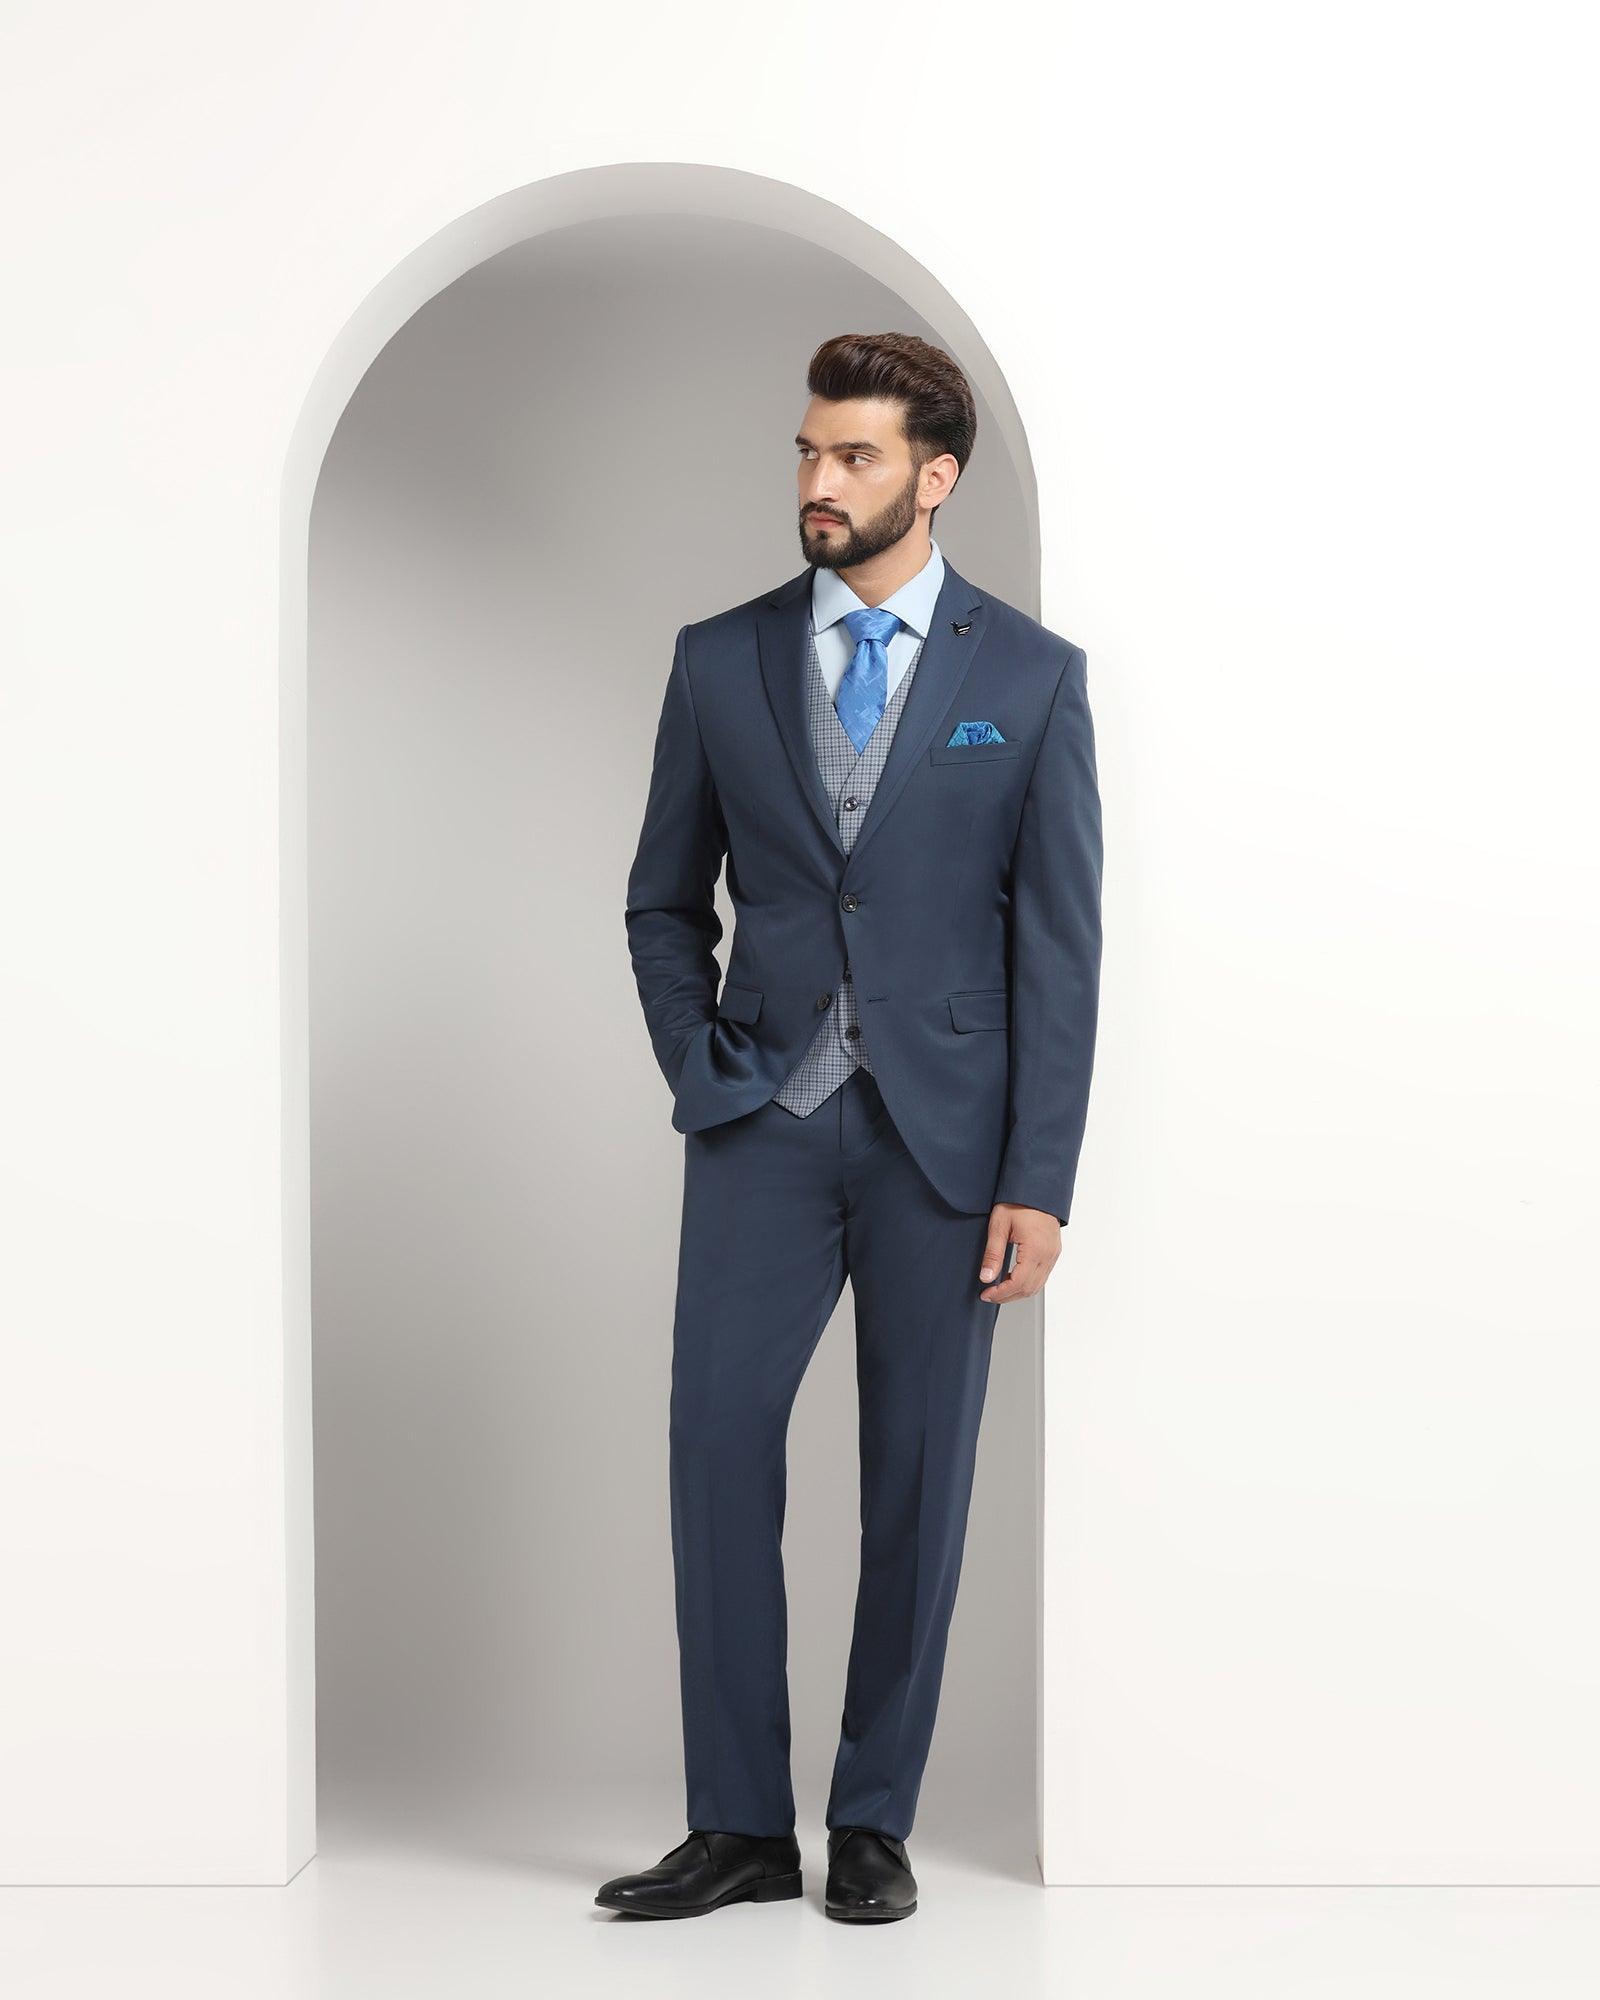 Multitude 6X Teal Solid Formal Suit Throne